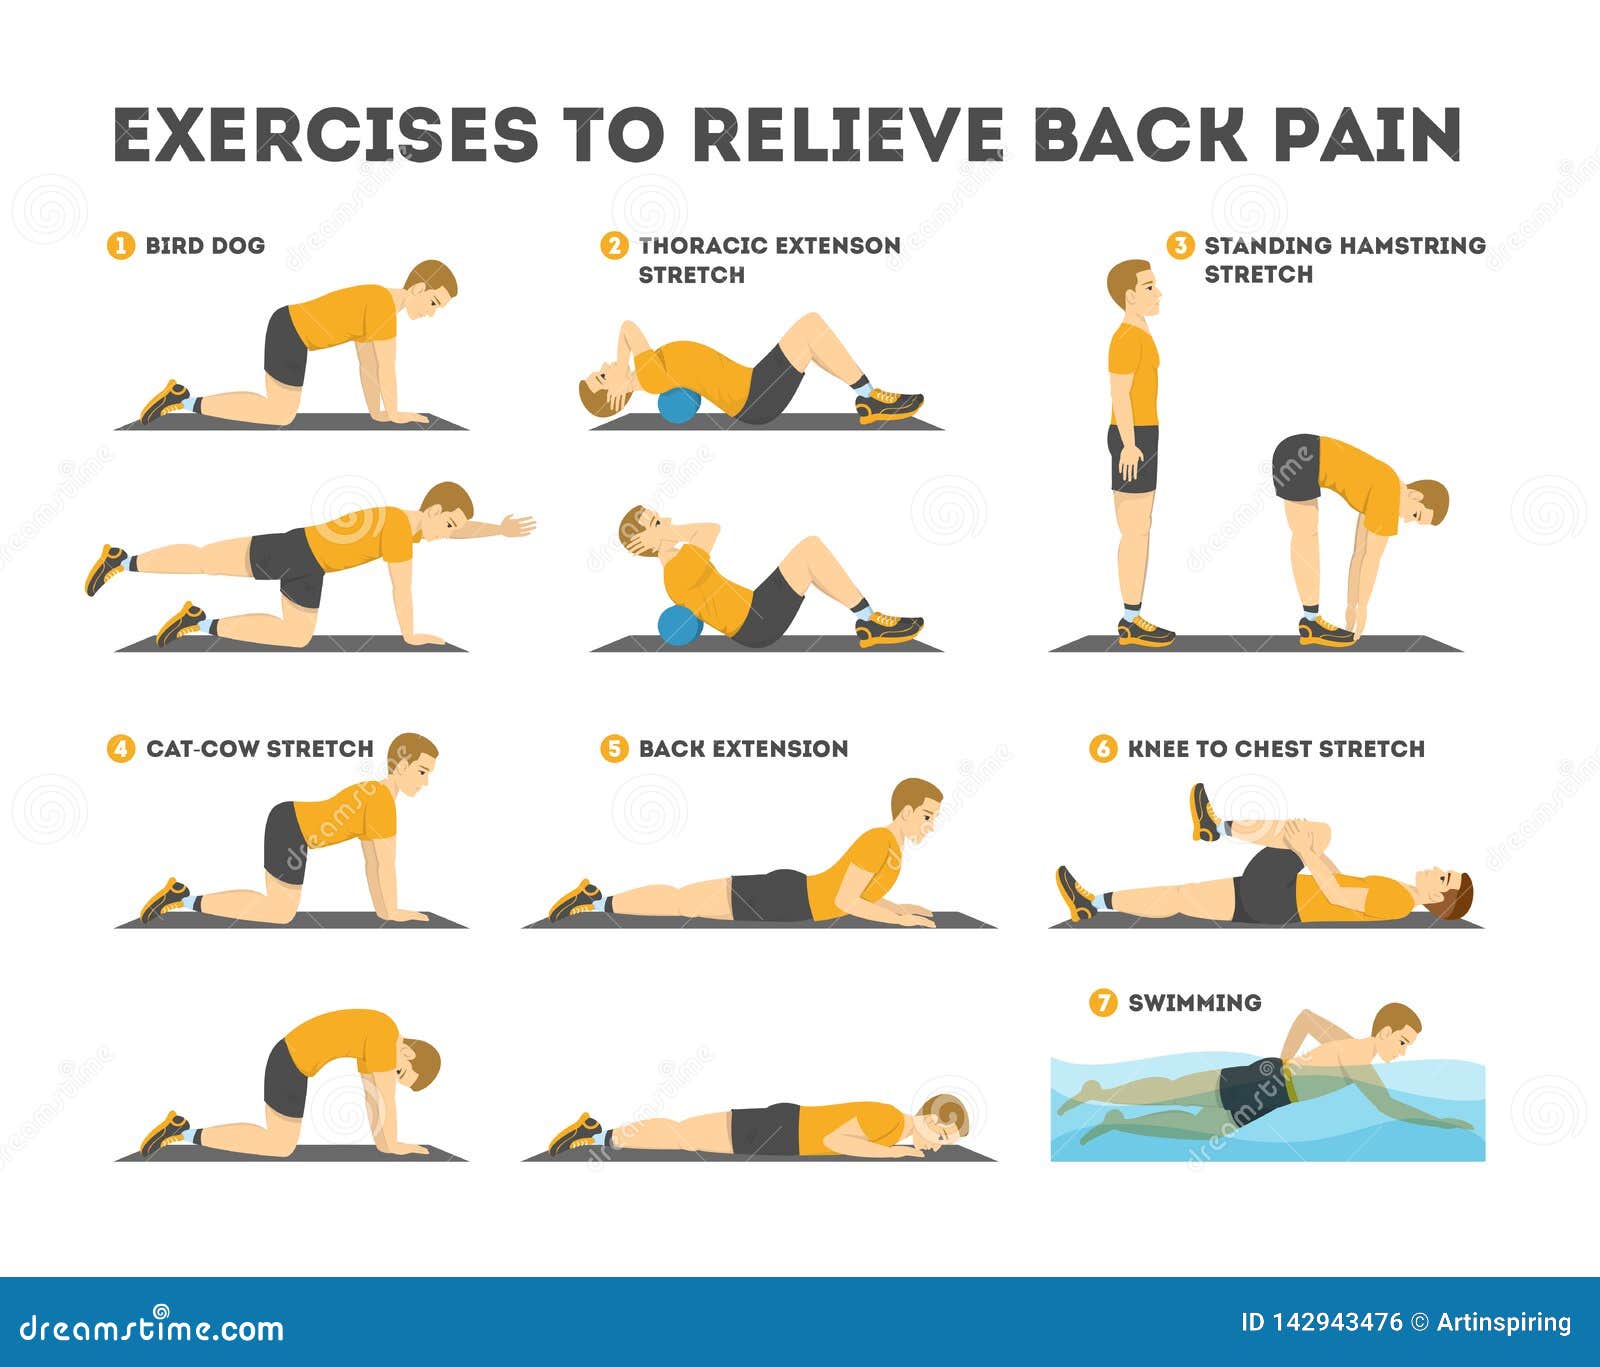 Stretching For Lower Back Pain